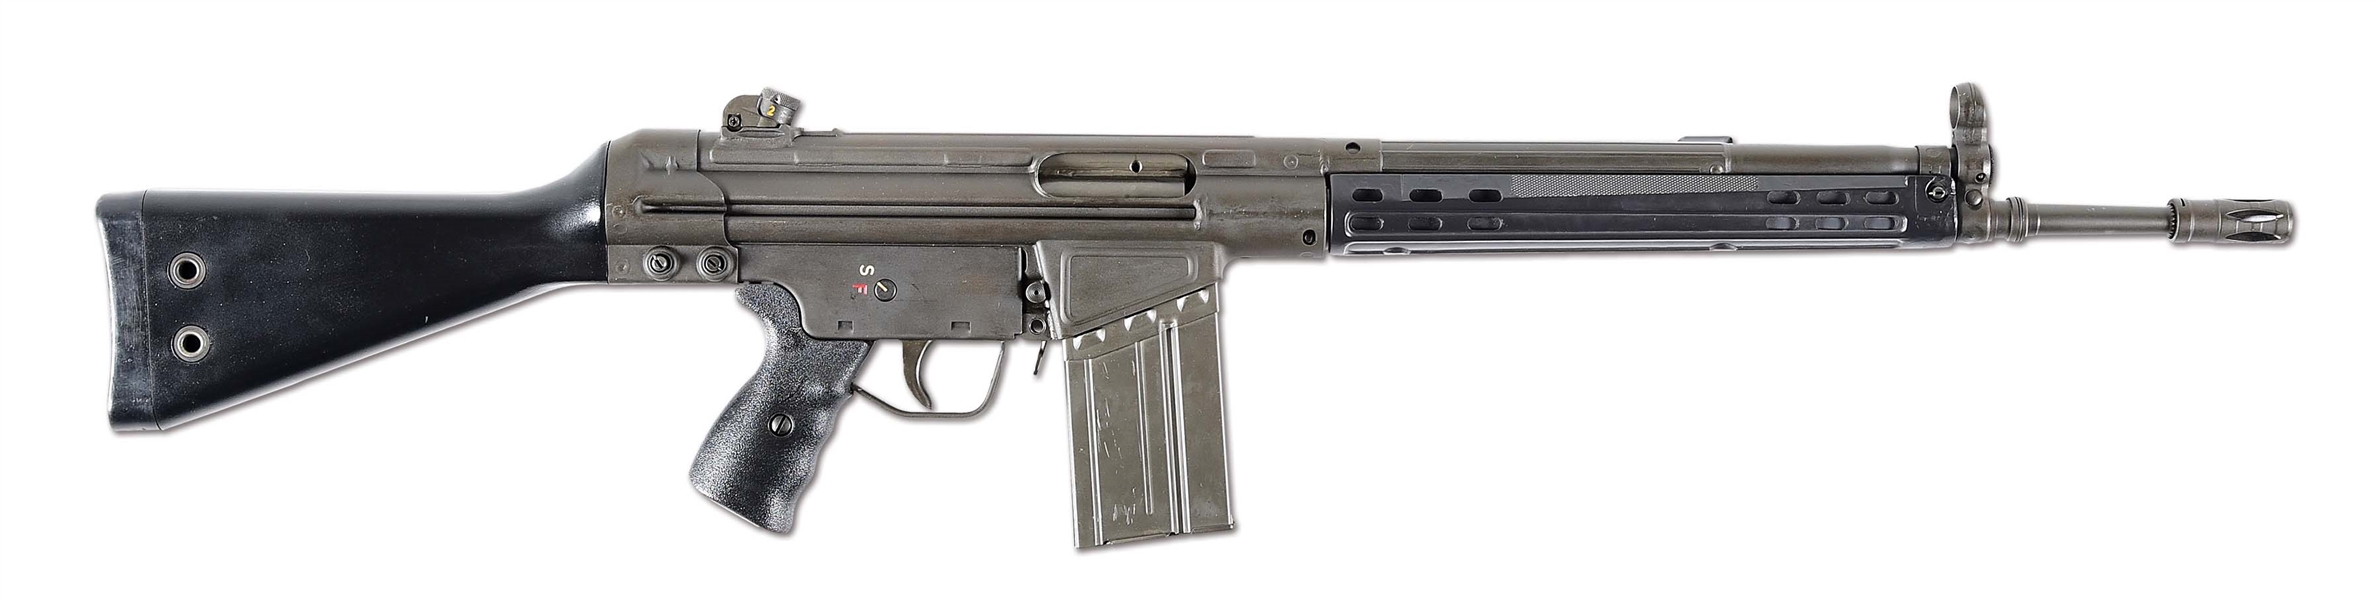 (C) SCARCE AND EARLY PRE-BAN HECKLER & KOCH / GOLDEN STATE ARMS SANTE FE DIVISION HK41 SEMI-AUTOMATIC RIFLE WITH ACCESSORIES.